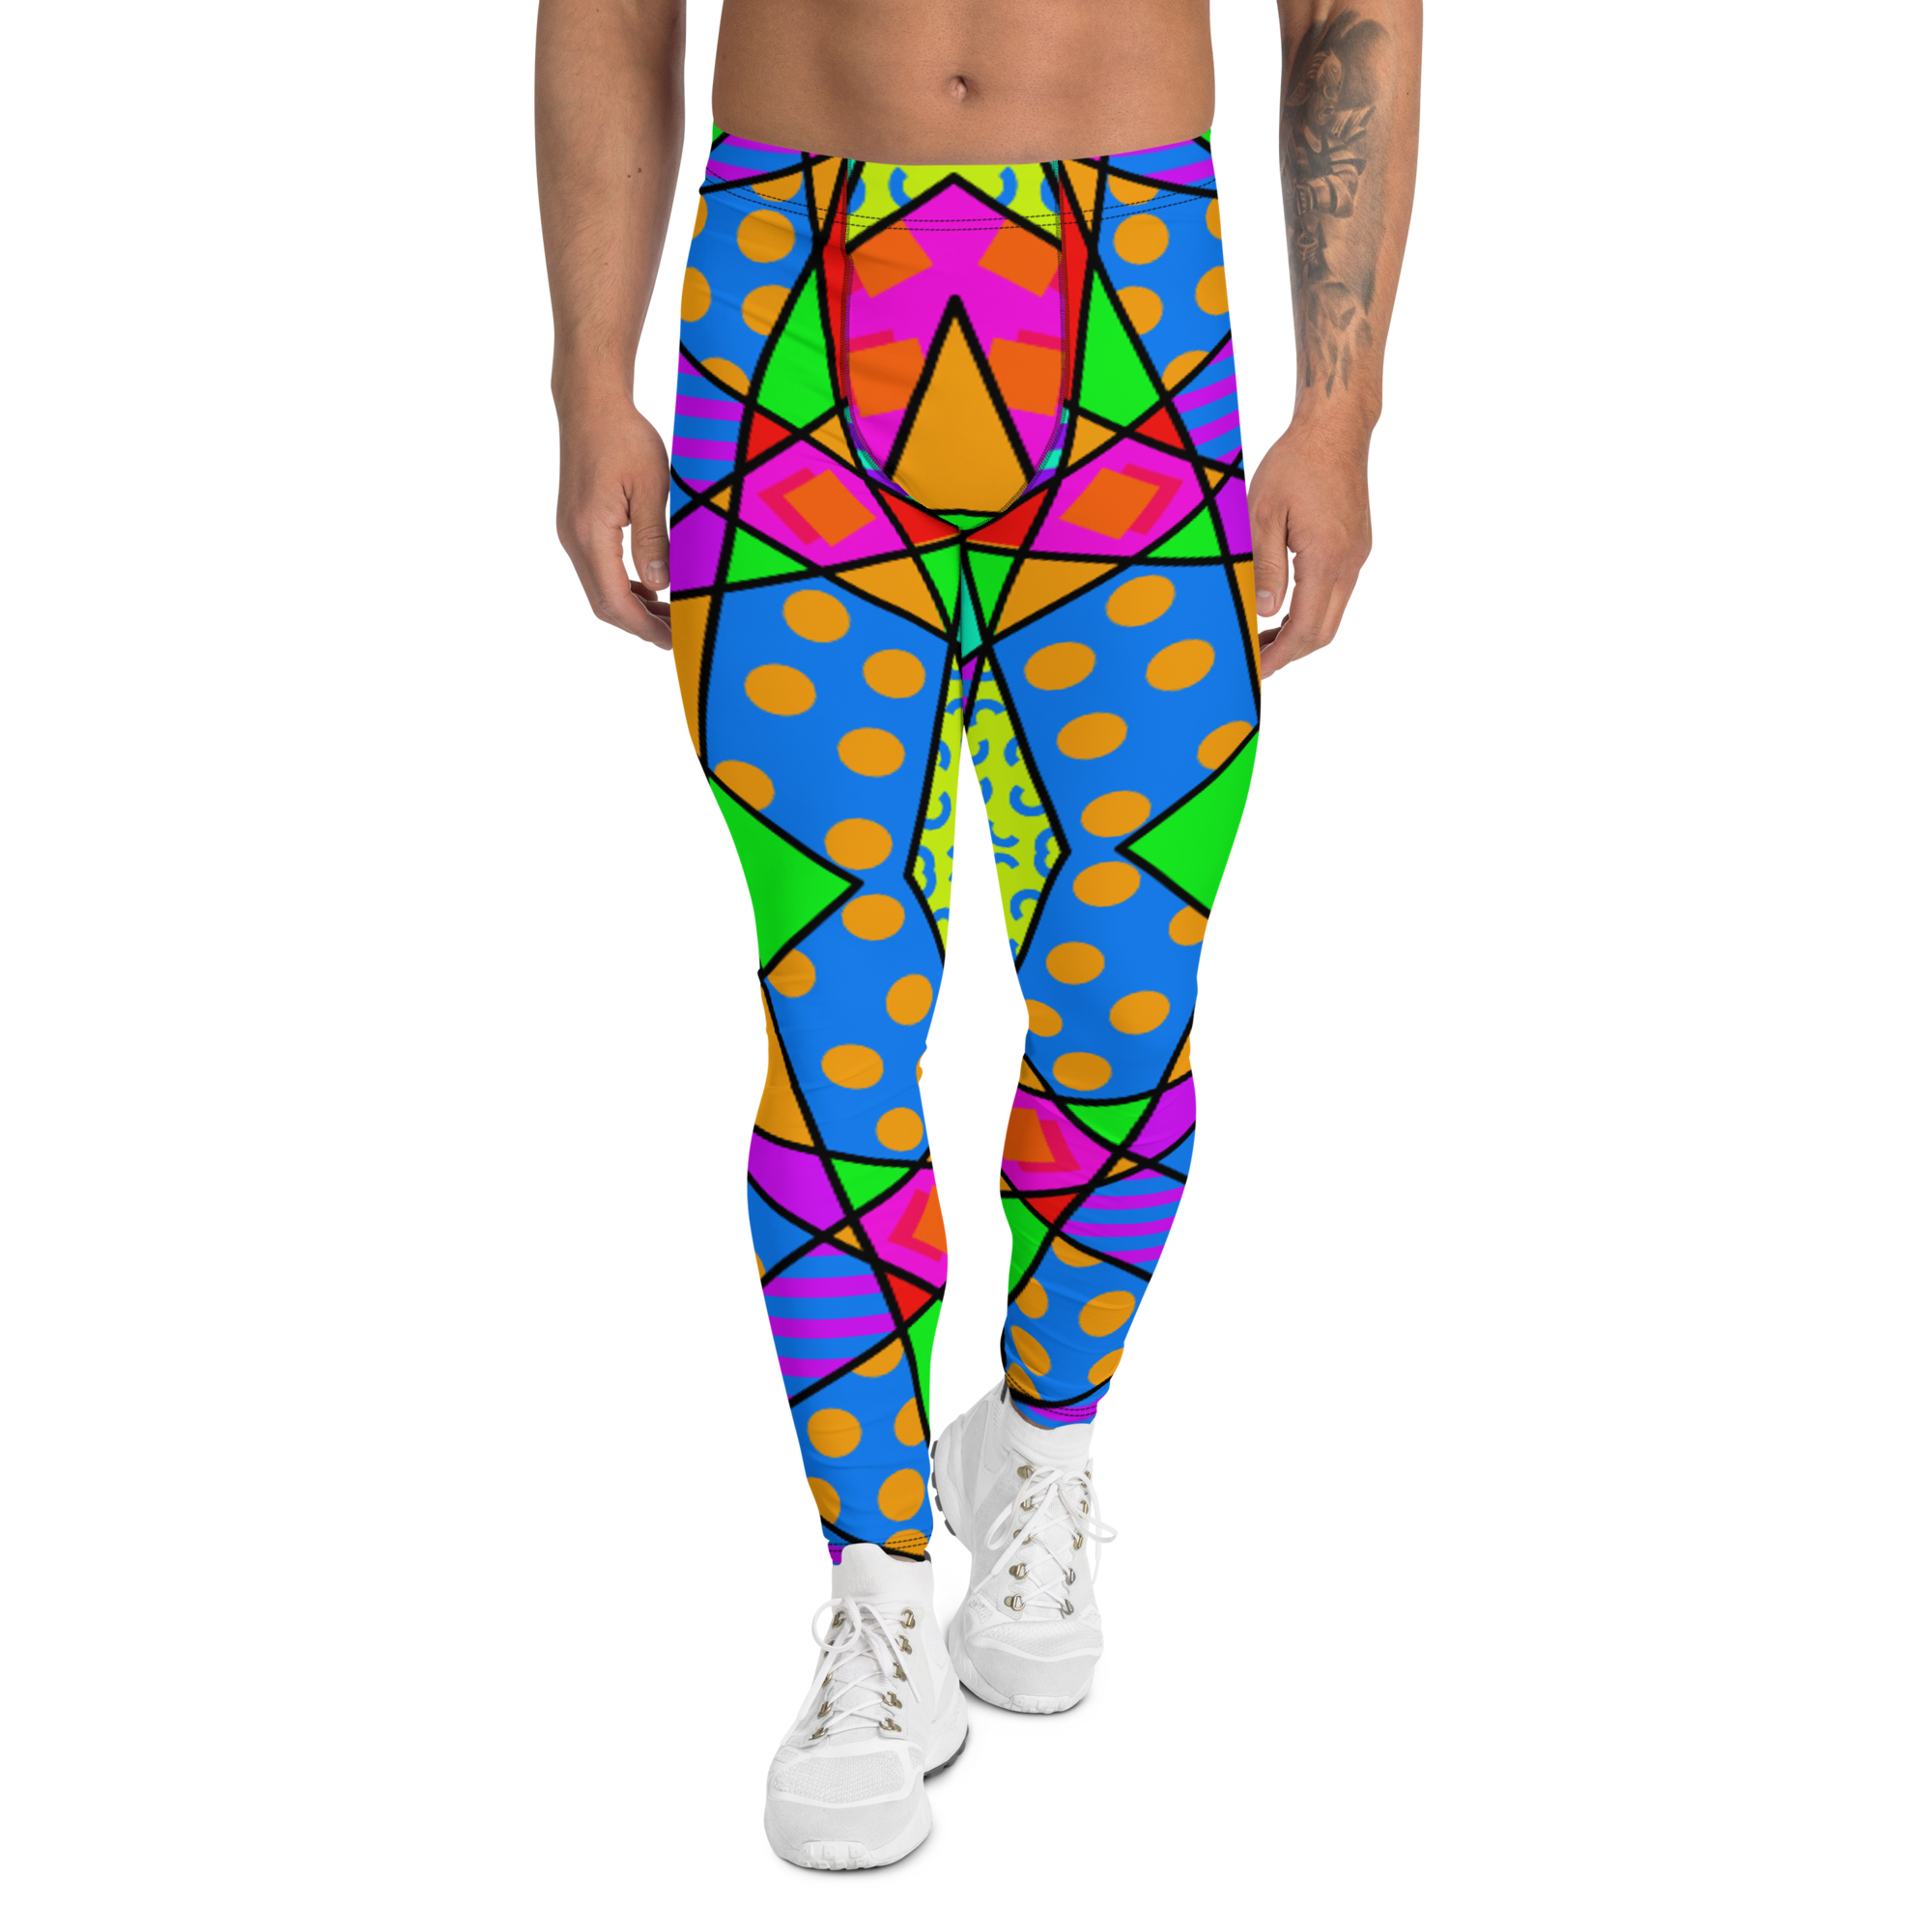 Pop Kei Harajuku fashion leggings for men with geometric Harlequin pattern in bold colors including red, pink, orange, blue, green and purple with a black overlay on these unique festival outfit meggings by BillingtonPix